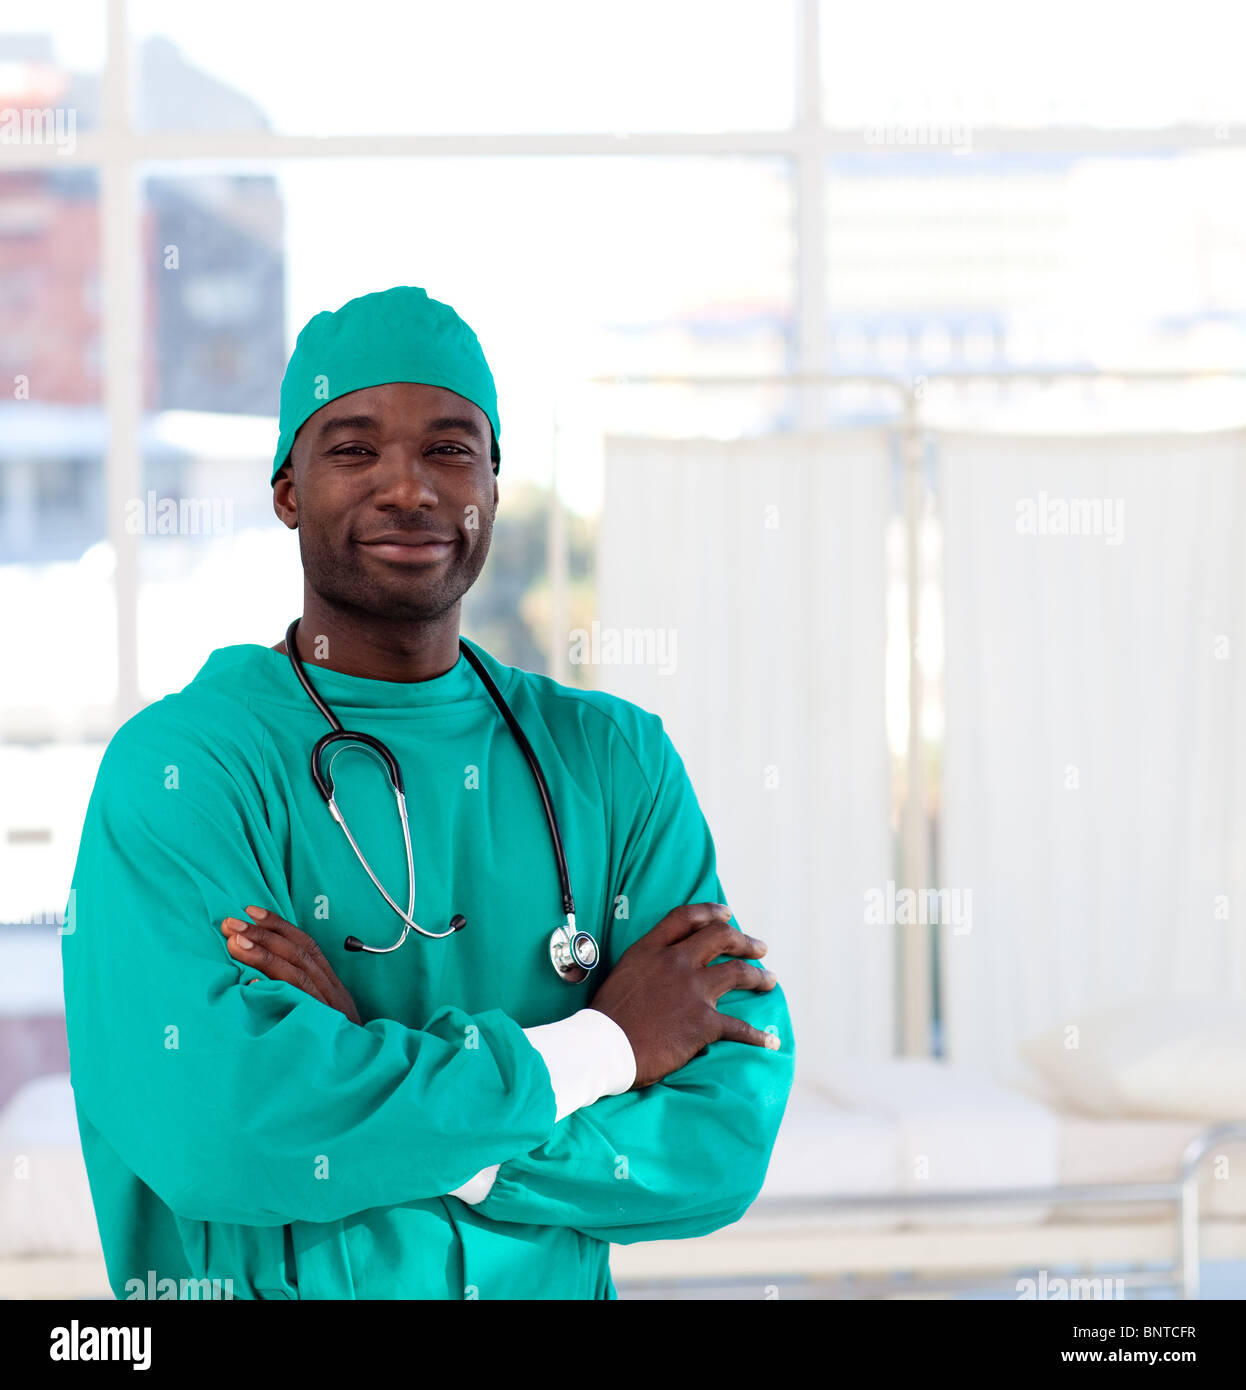 Surgeon in an operating theater Stock Photo